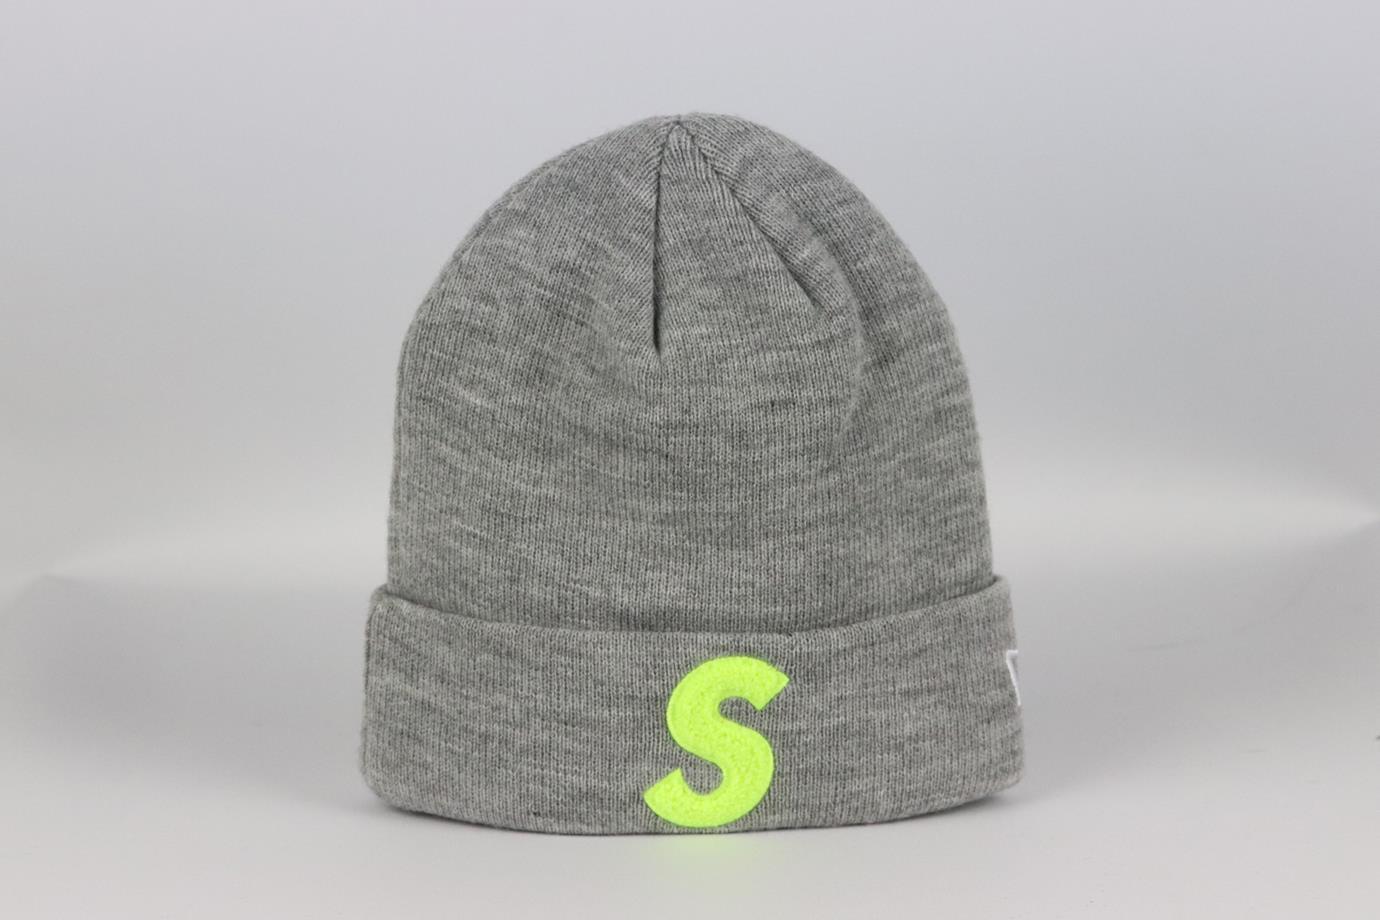 Supreme + New Era embroidered knitted beanie. Grey. Slips on. 100% Acrylic. Does not come with dustbag or box. Size: One Size: Length: 8.5 in. Circumference: 17 in. Very good condition - As new condition, no sign of wear; see pictures.